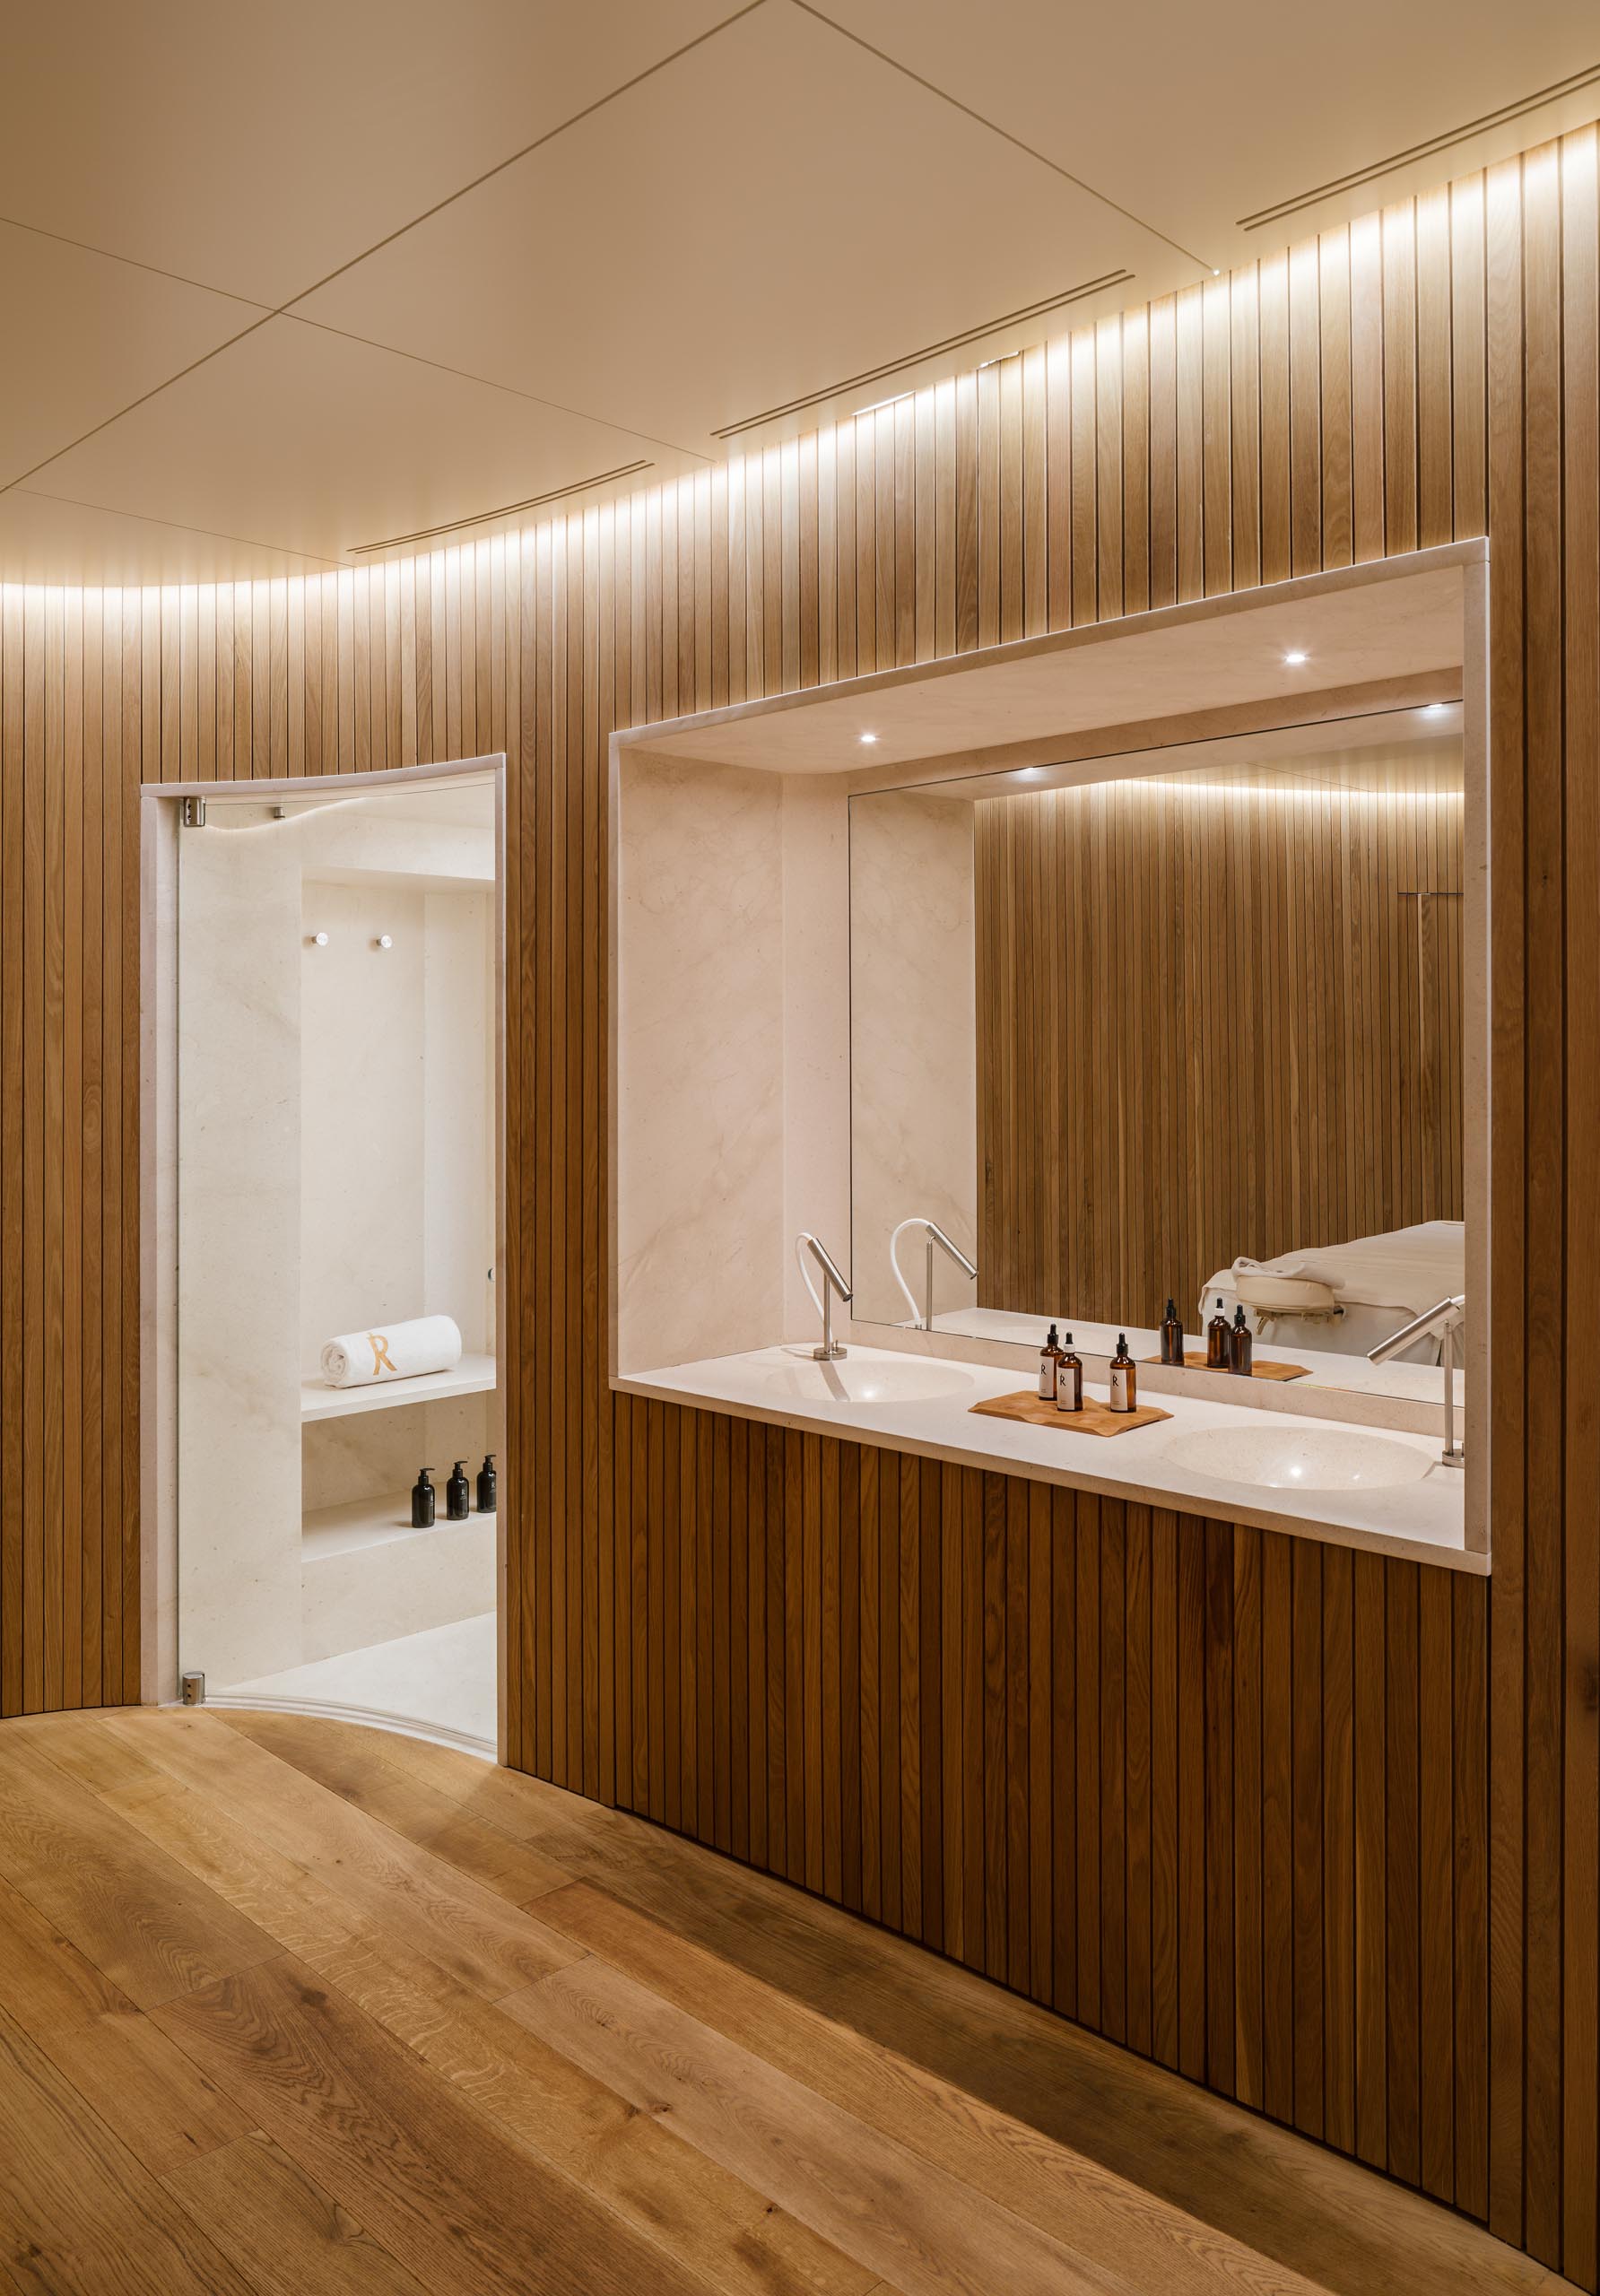 Modern massage rooms with wood slat curved walls and hidden lighting.